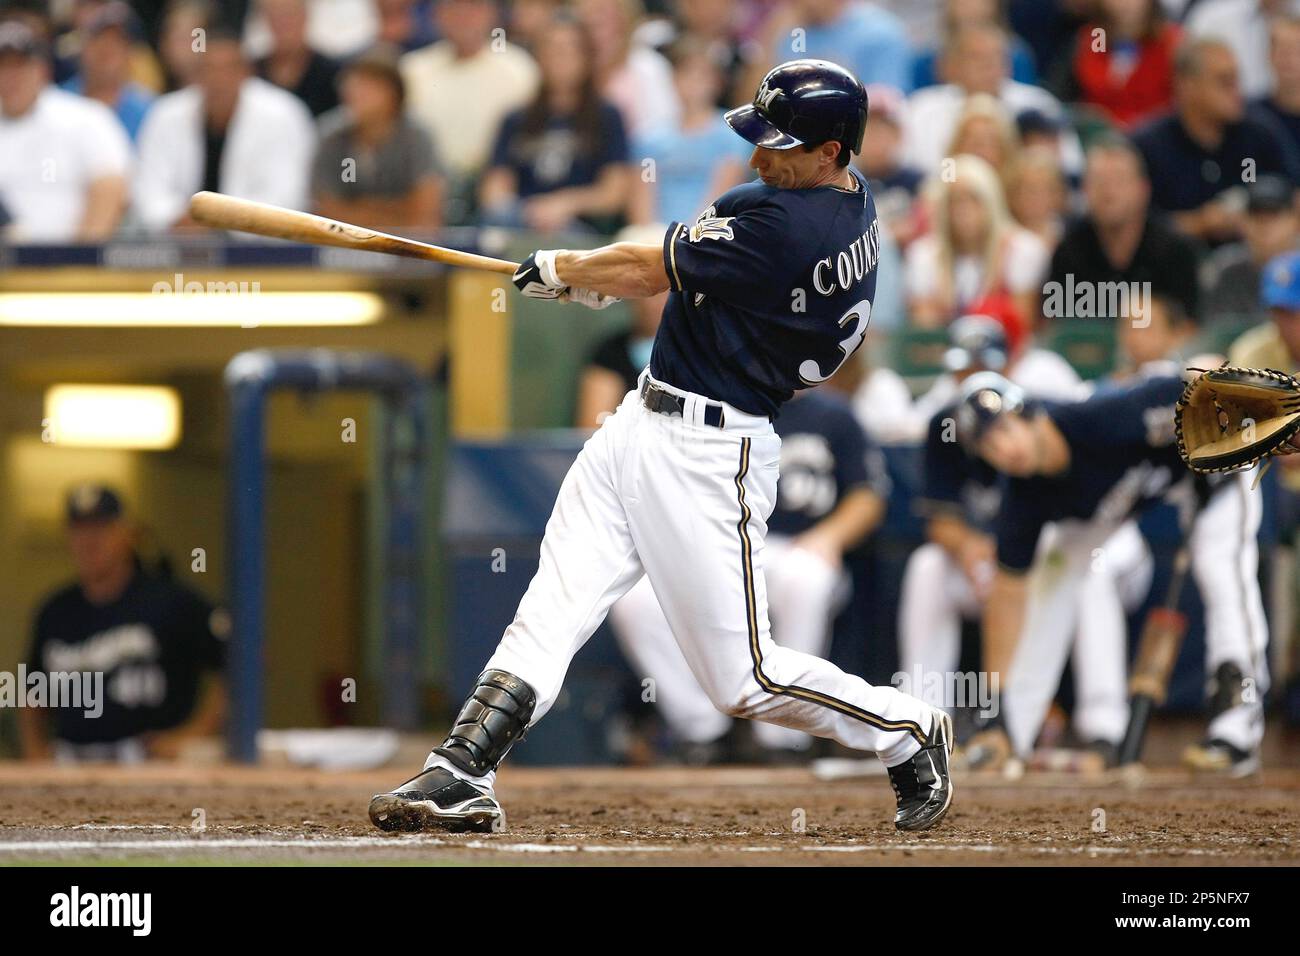 MILWAUKEE, WI - JULY 30: Shortstop Craig Counsell #30 of the